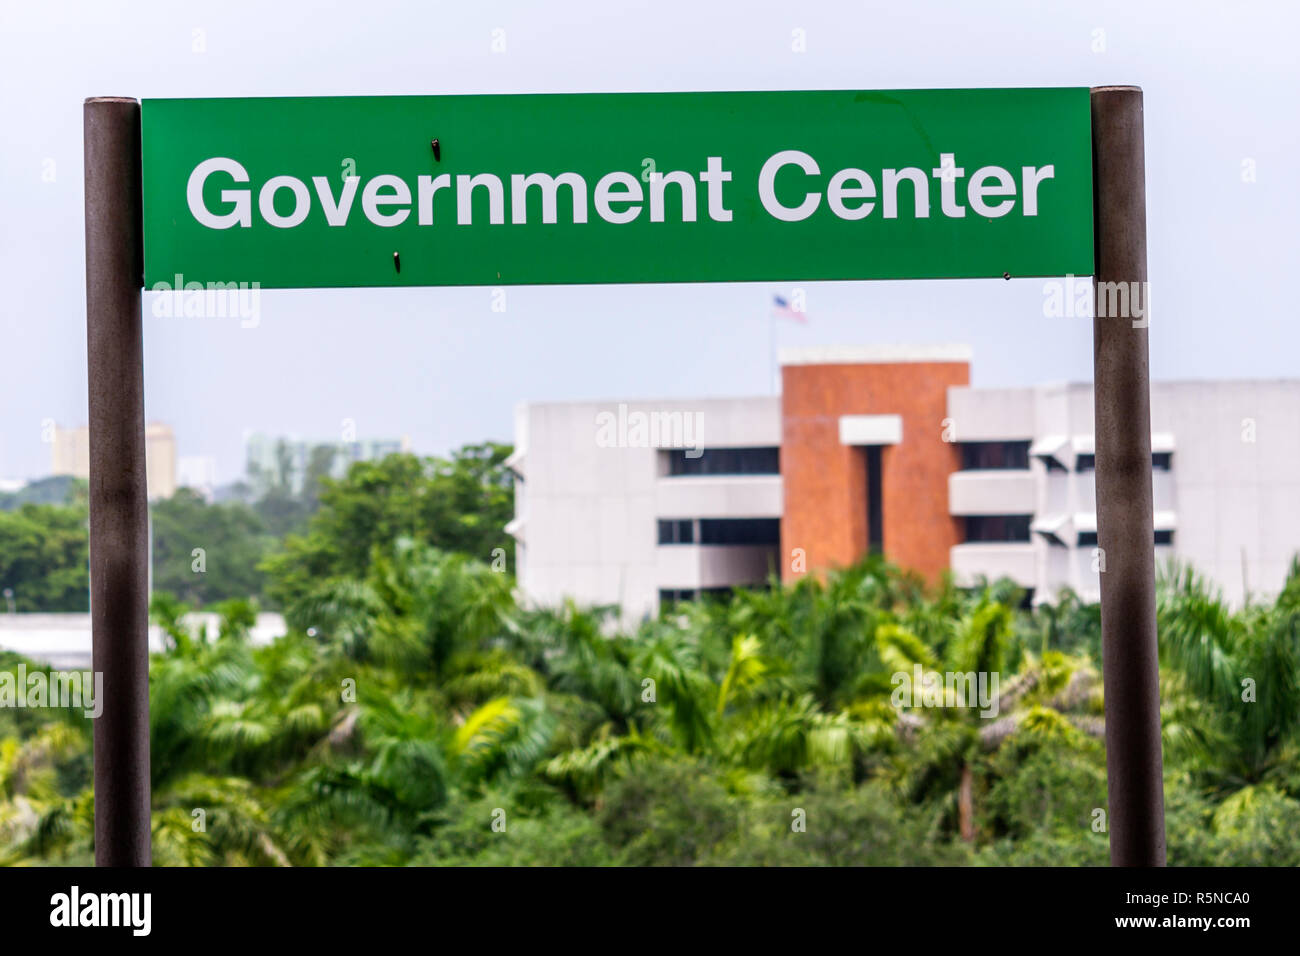 Miami Florida,Government Center Metrorail Station,sign,logo,location,elevated rapid transit system,Stephen P. Clark Government Center,visitors travel Stock Photo